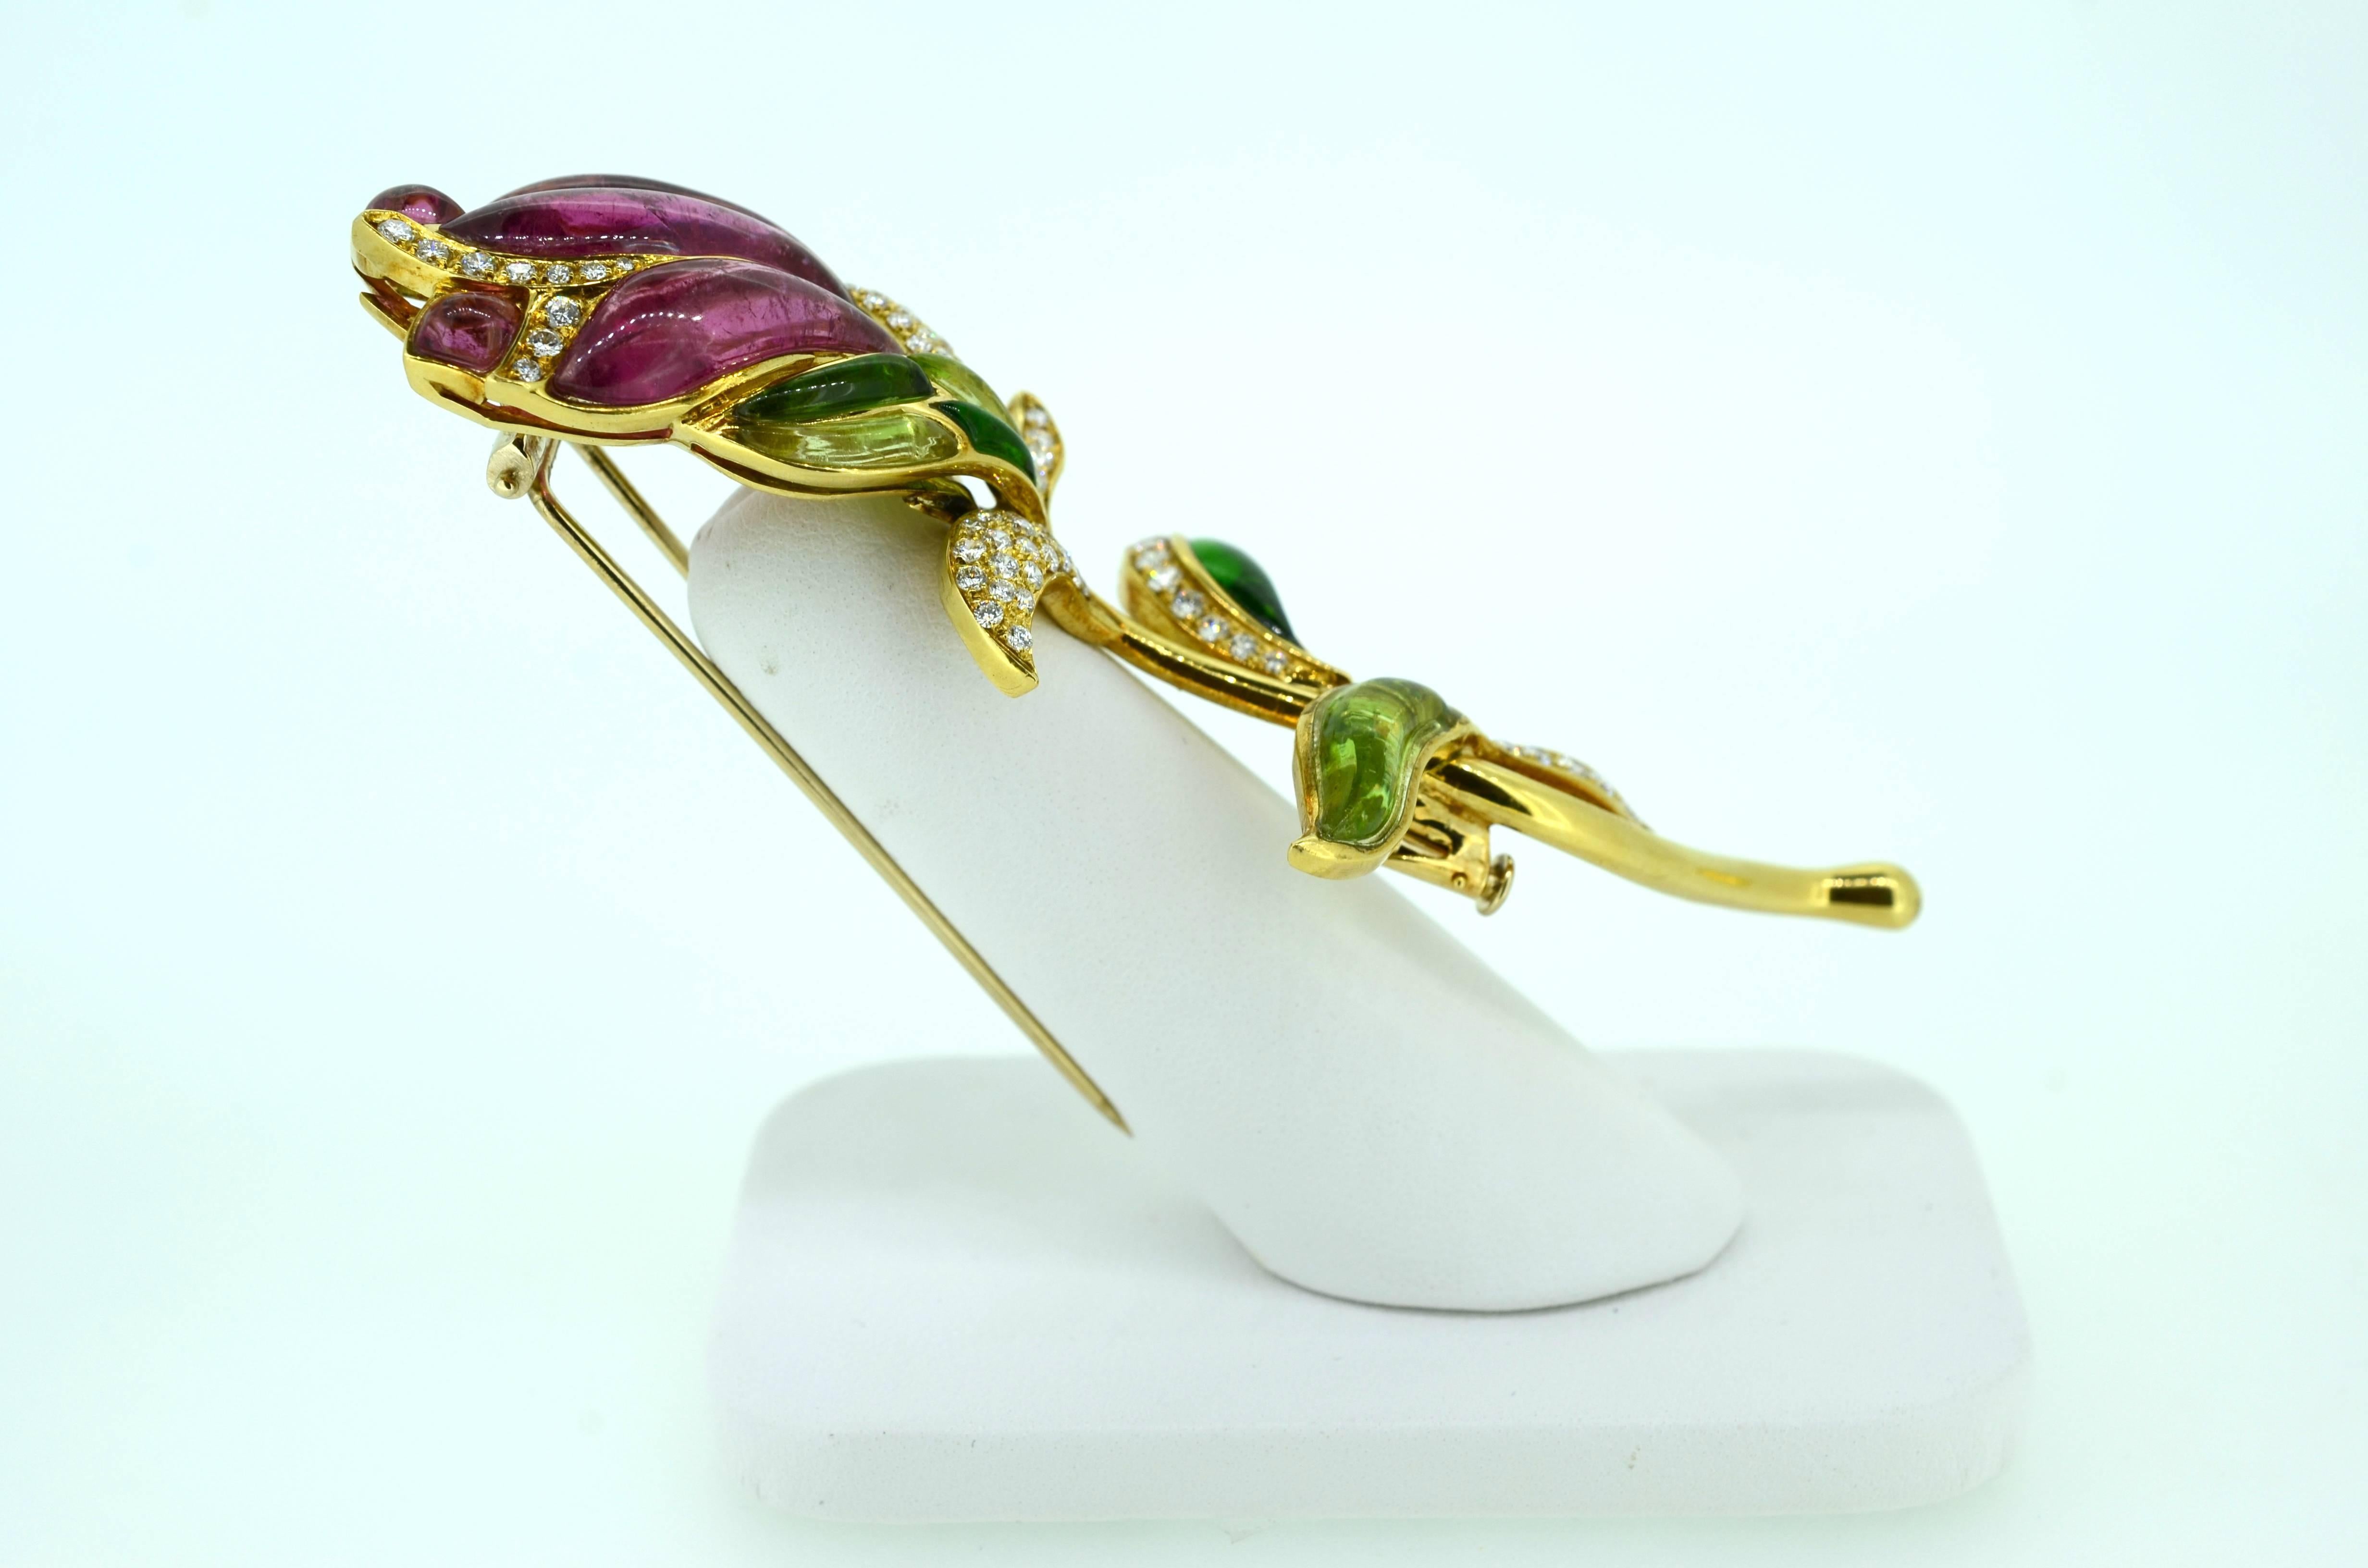 Gorgeous gemstone brooch: 18kt gold, one of a kind graceful floral design with stem and leaves; a statement piece. 3.75 inches long and at the widest point 1.5 inches. The brooch is made of carved and cabochon cut leaves and petals made of Pink and